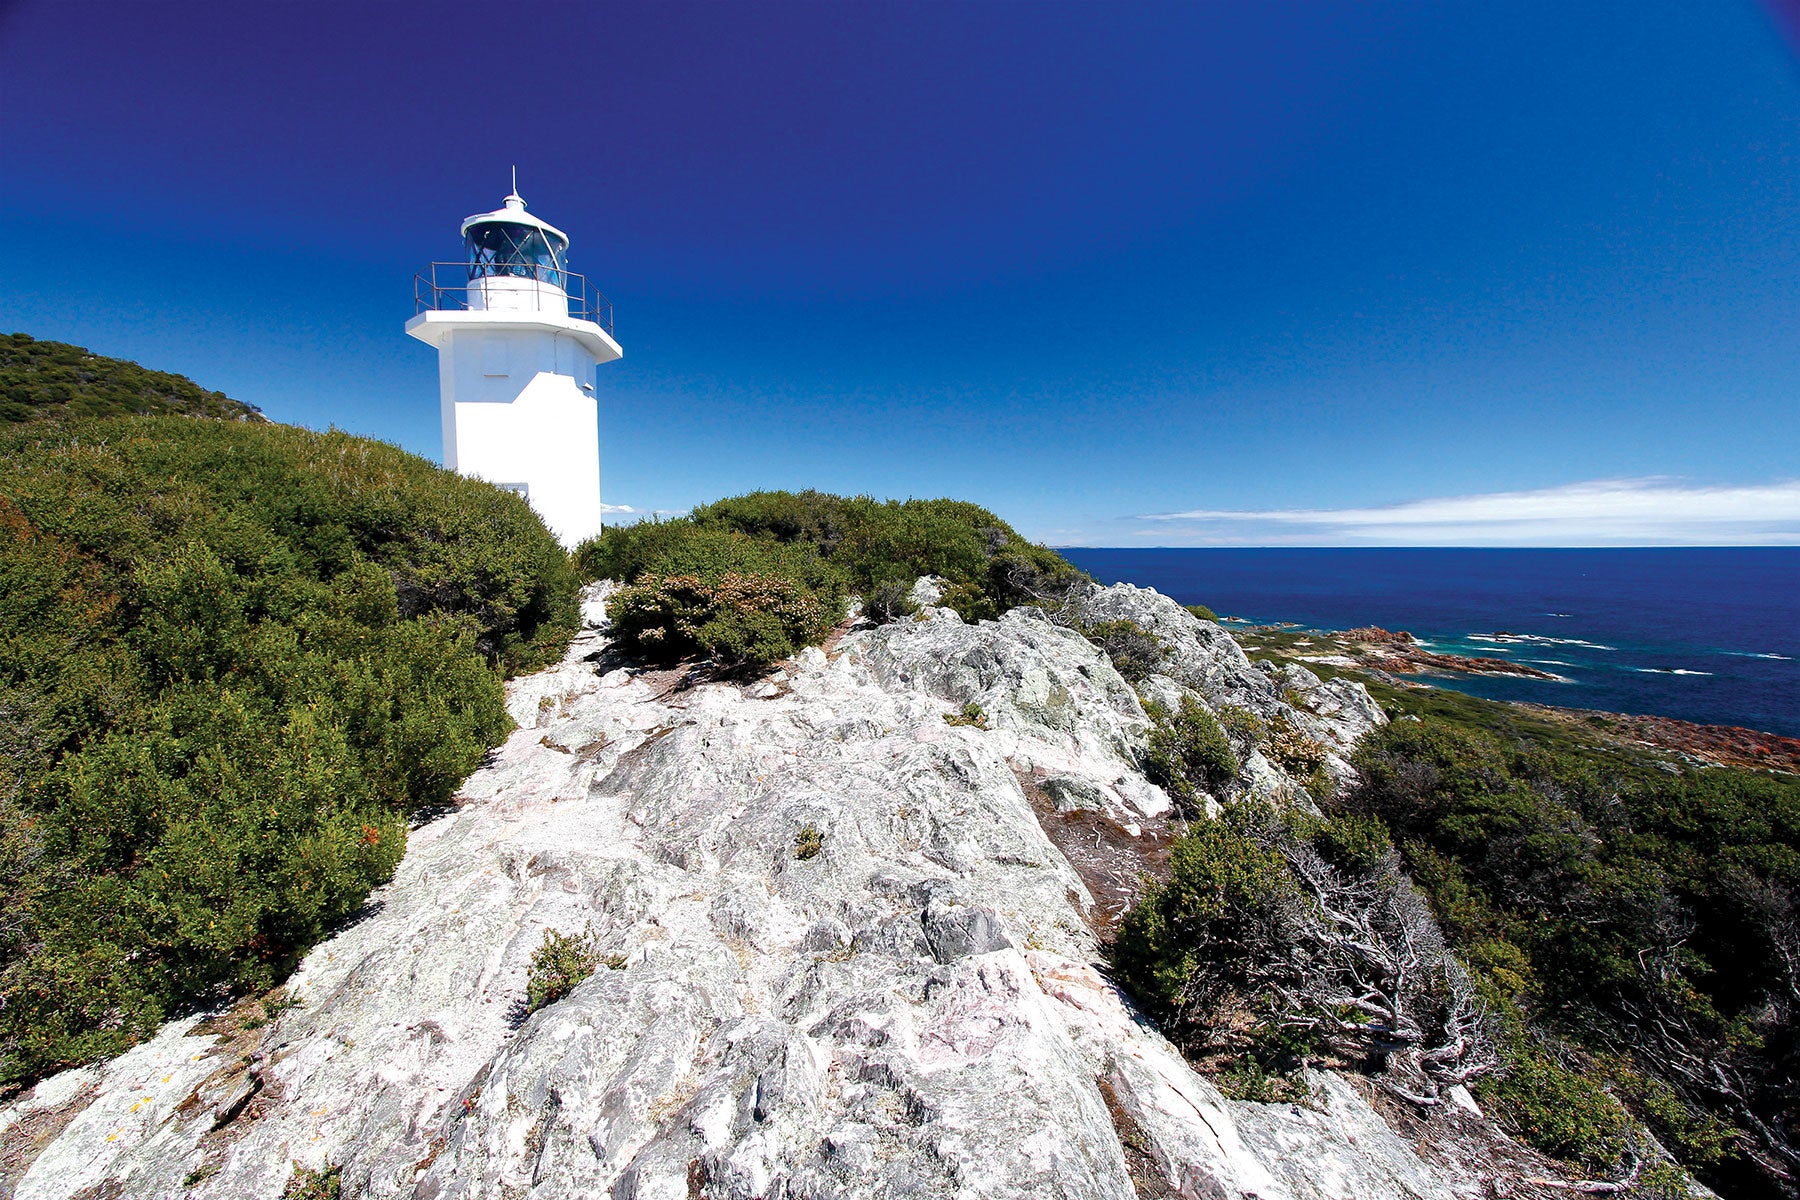 Heritage-listed Table Cape Lighthouse